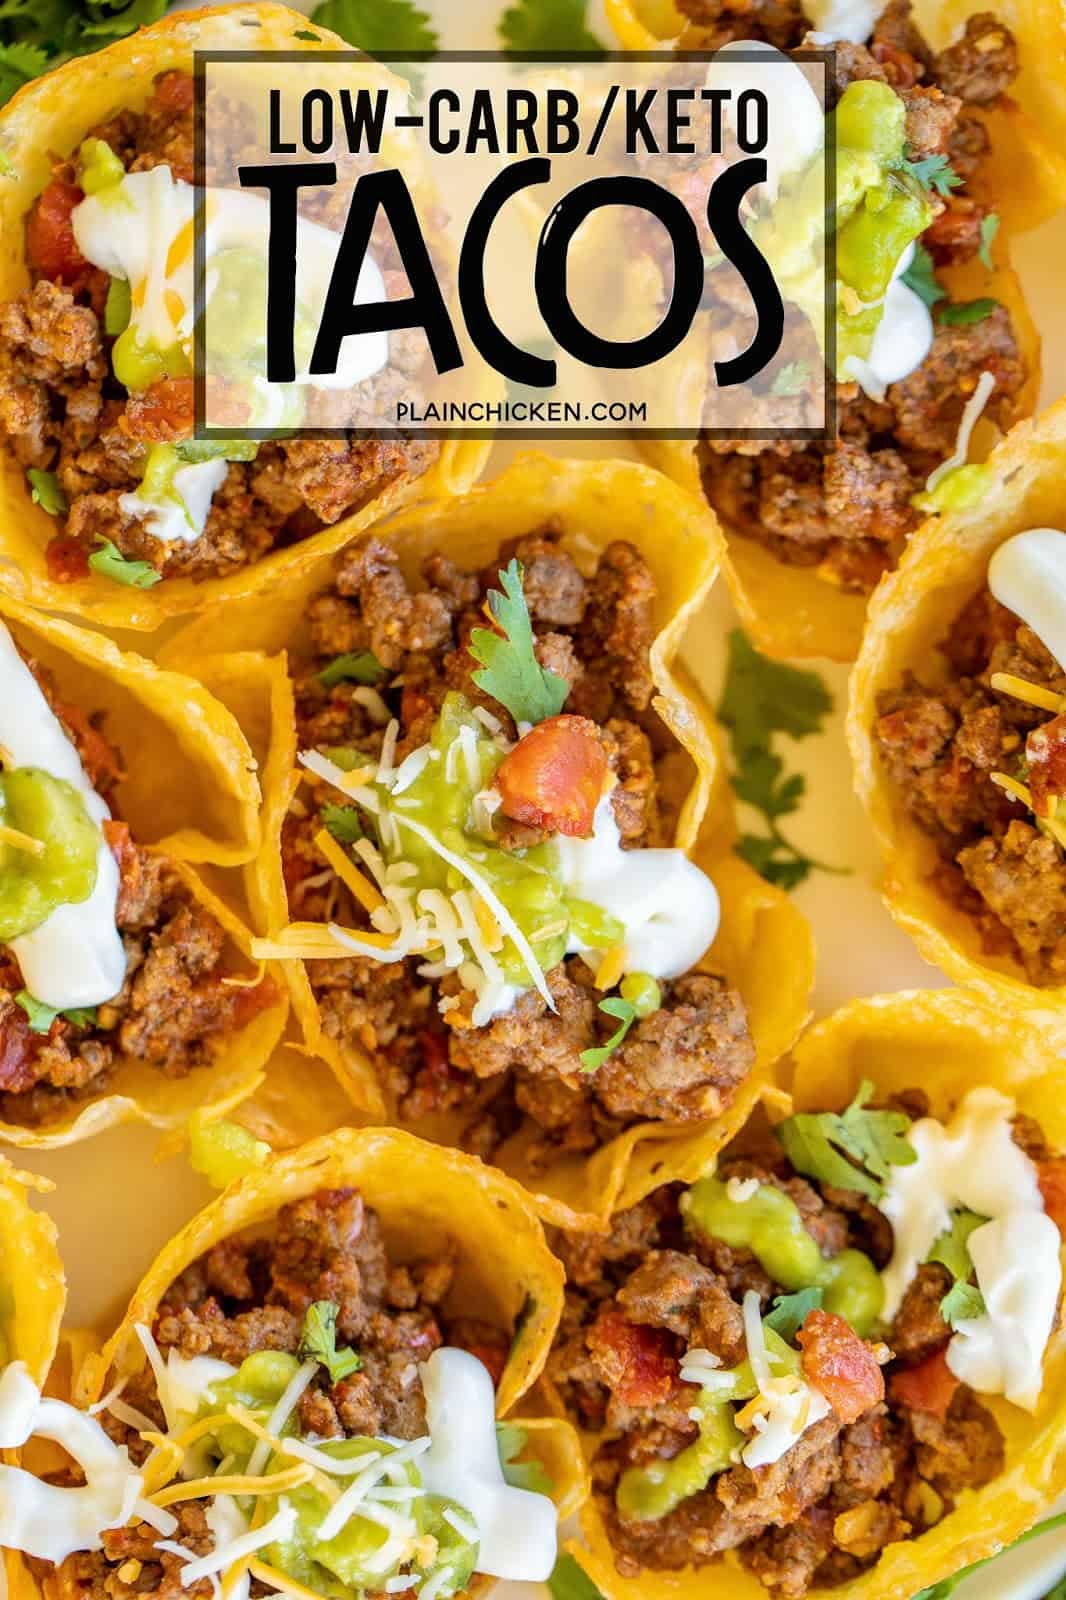 Low-Carb Keto Tacos - all the flavors of tacos without all the carbs! The shells are made out of cheese! OMG! YUM! Cheese, ground beef or turkey, taco seasoning, diced tomatoes and green chiles, and water. Ready to eat in minutes. Can make shells ahead of time for a quick weeknight meal. You'll never miss the carbs! #lowcarb #keto #tacos #mexicanfood #texmex